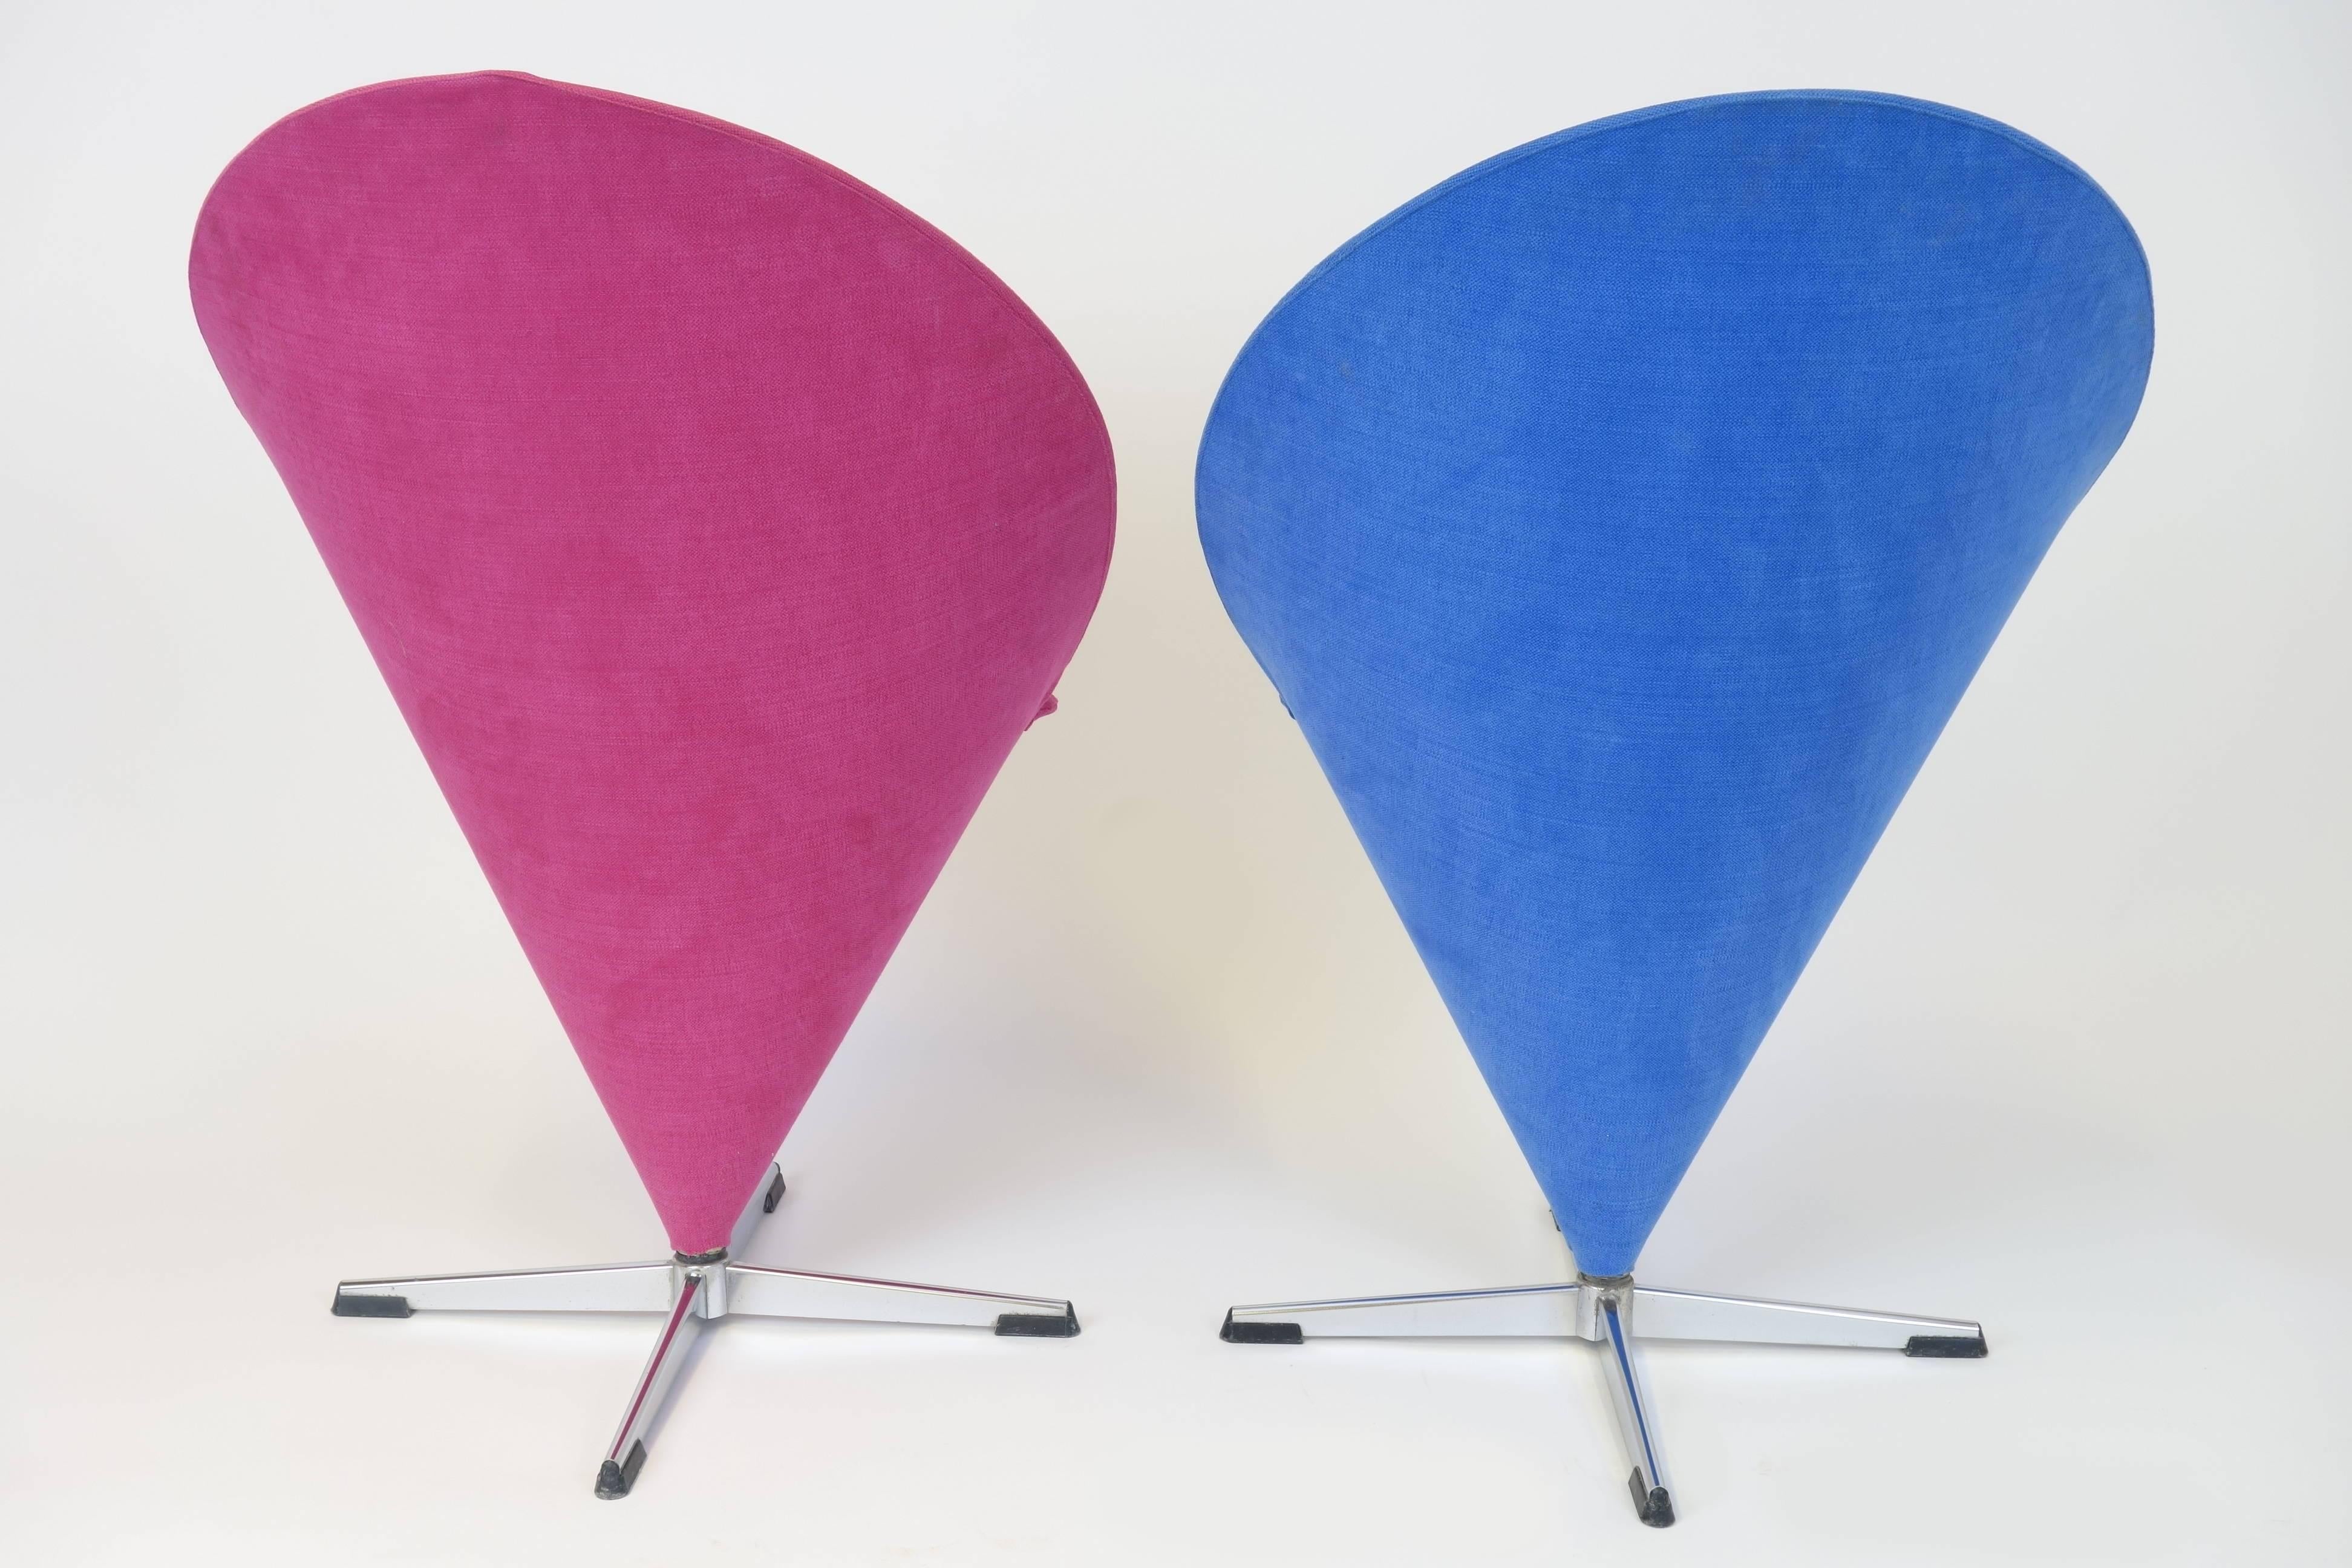 Polished Verner Panton Design Pair of Cone Chairs Vitra Blue Red Denmark Original Nehl For Sale